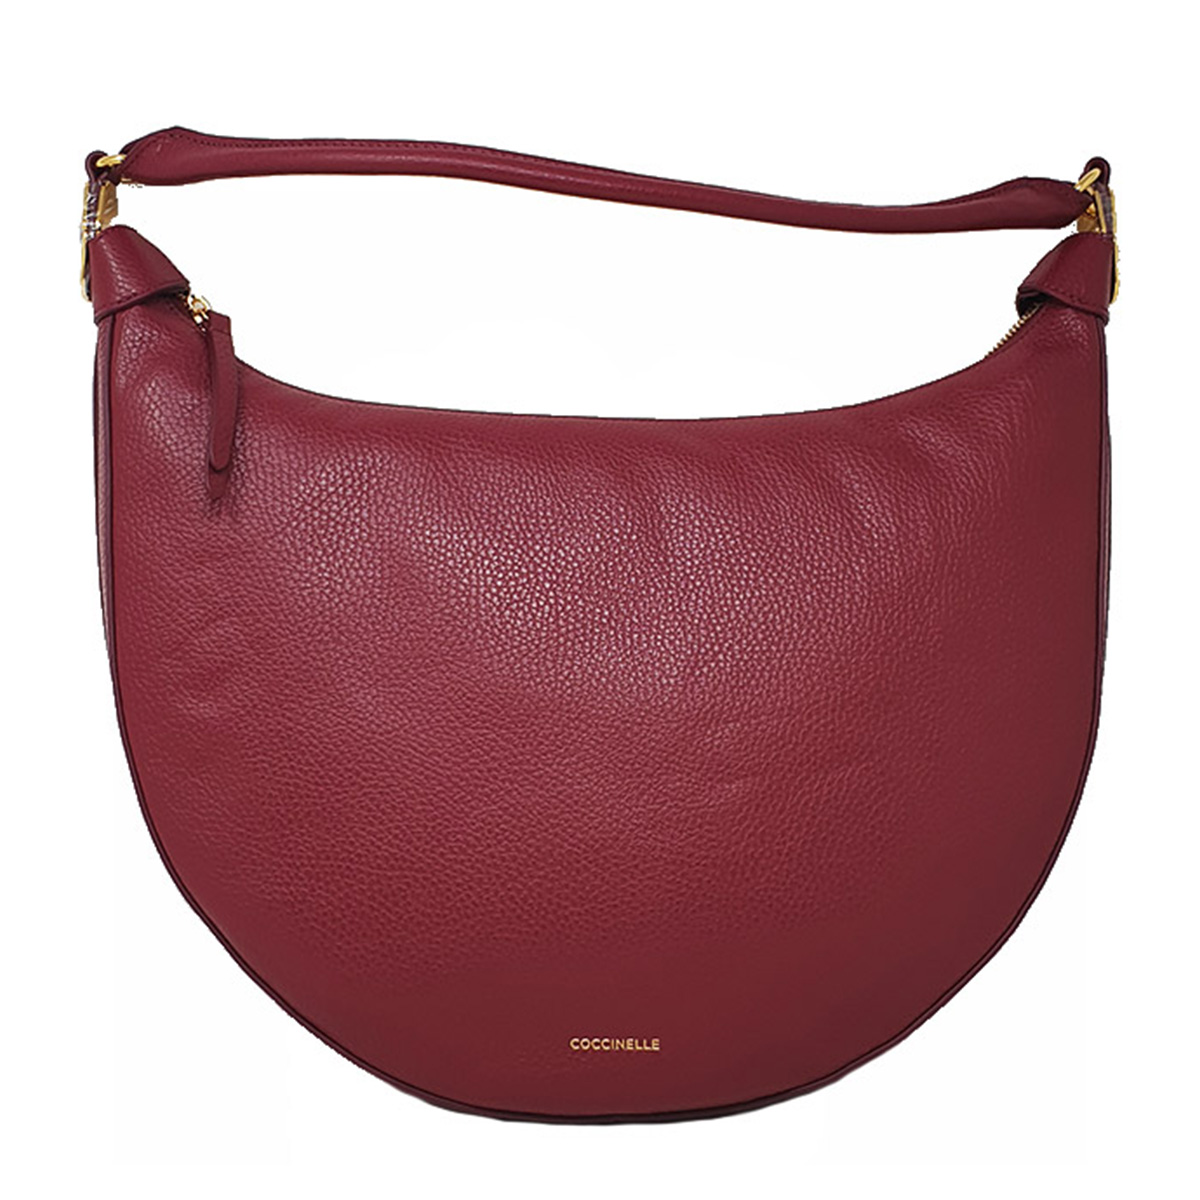 Coccinelle Bianca leather shoulder bag Red, Cra-wallonieShops